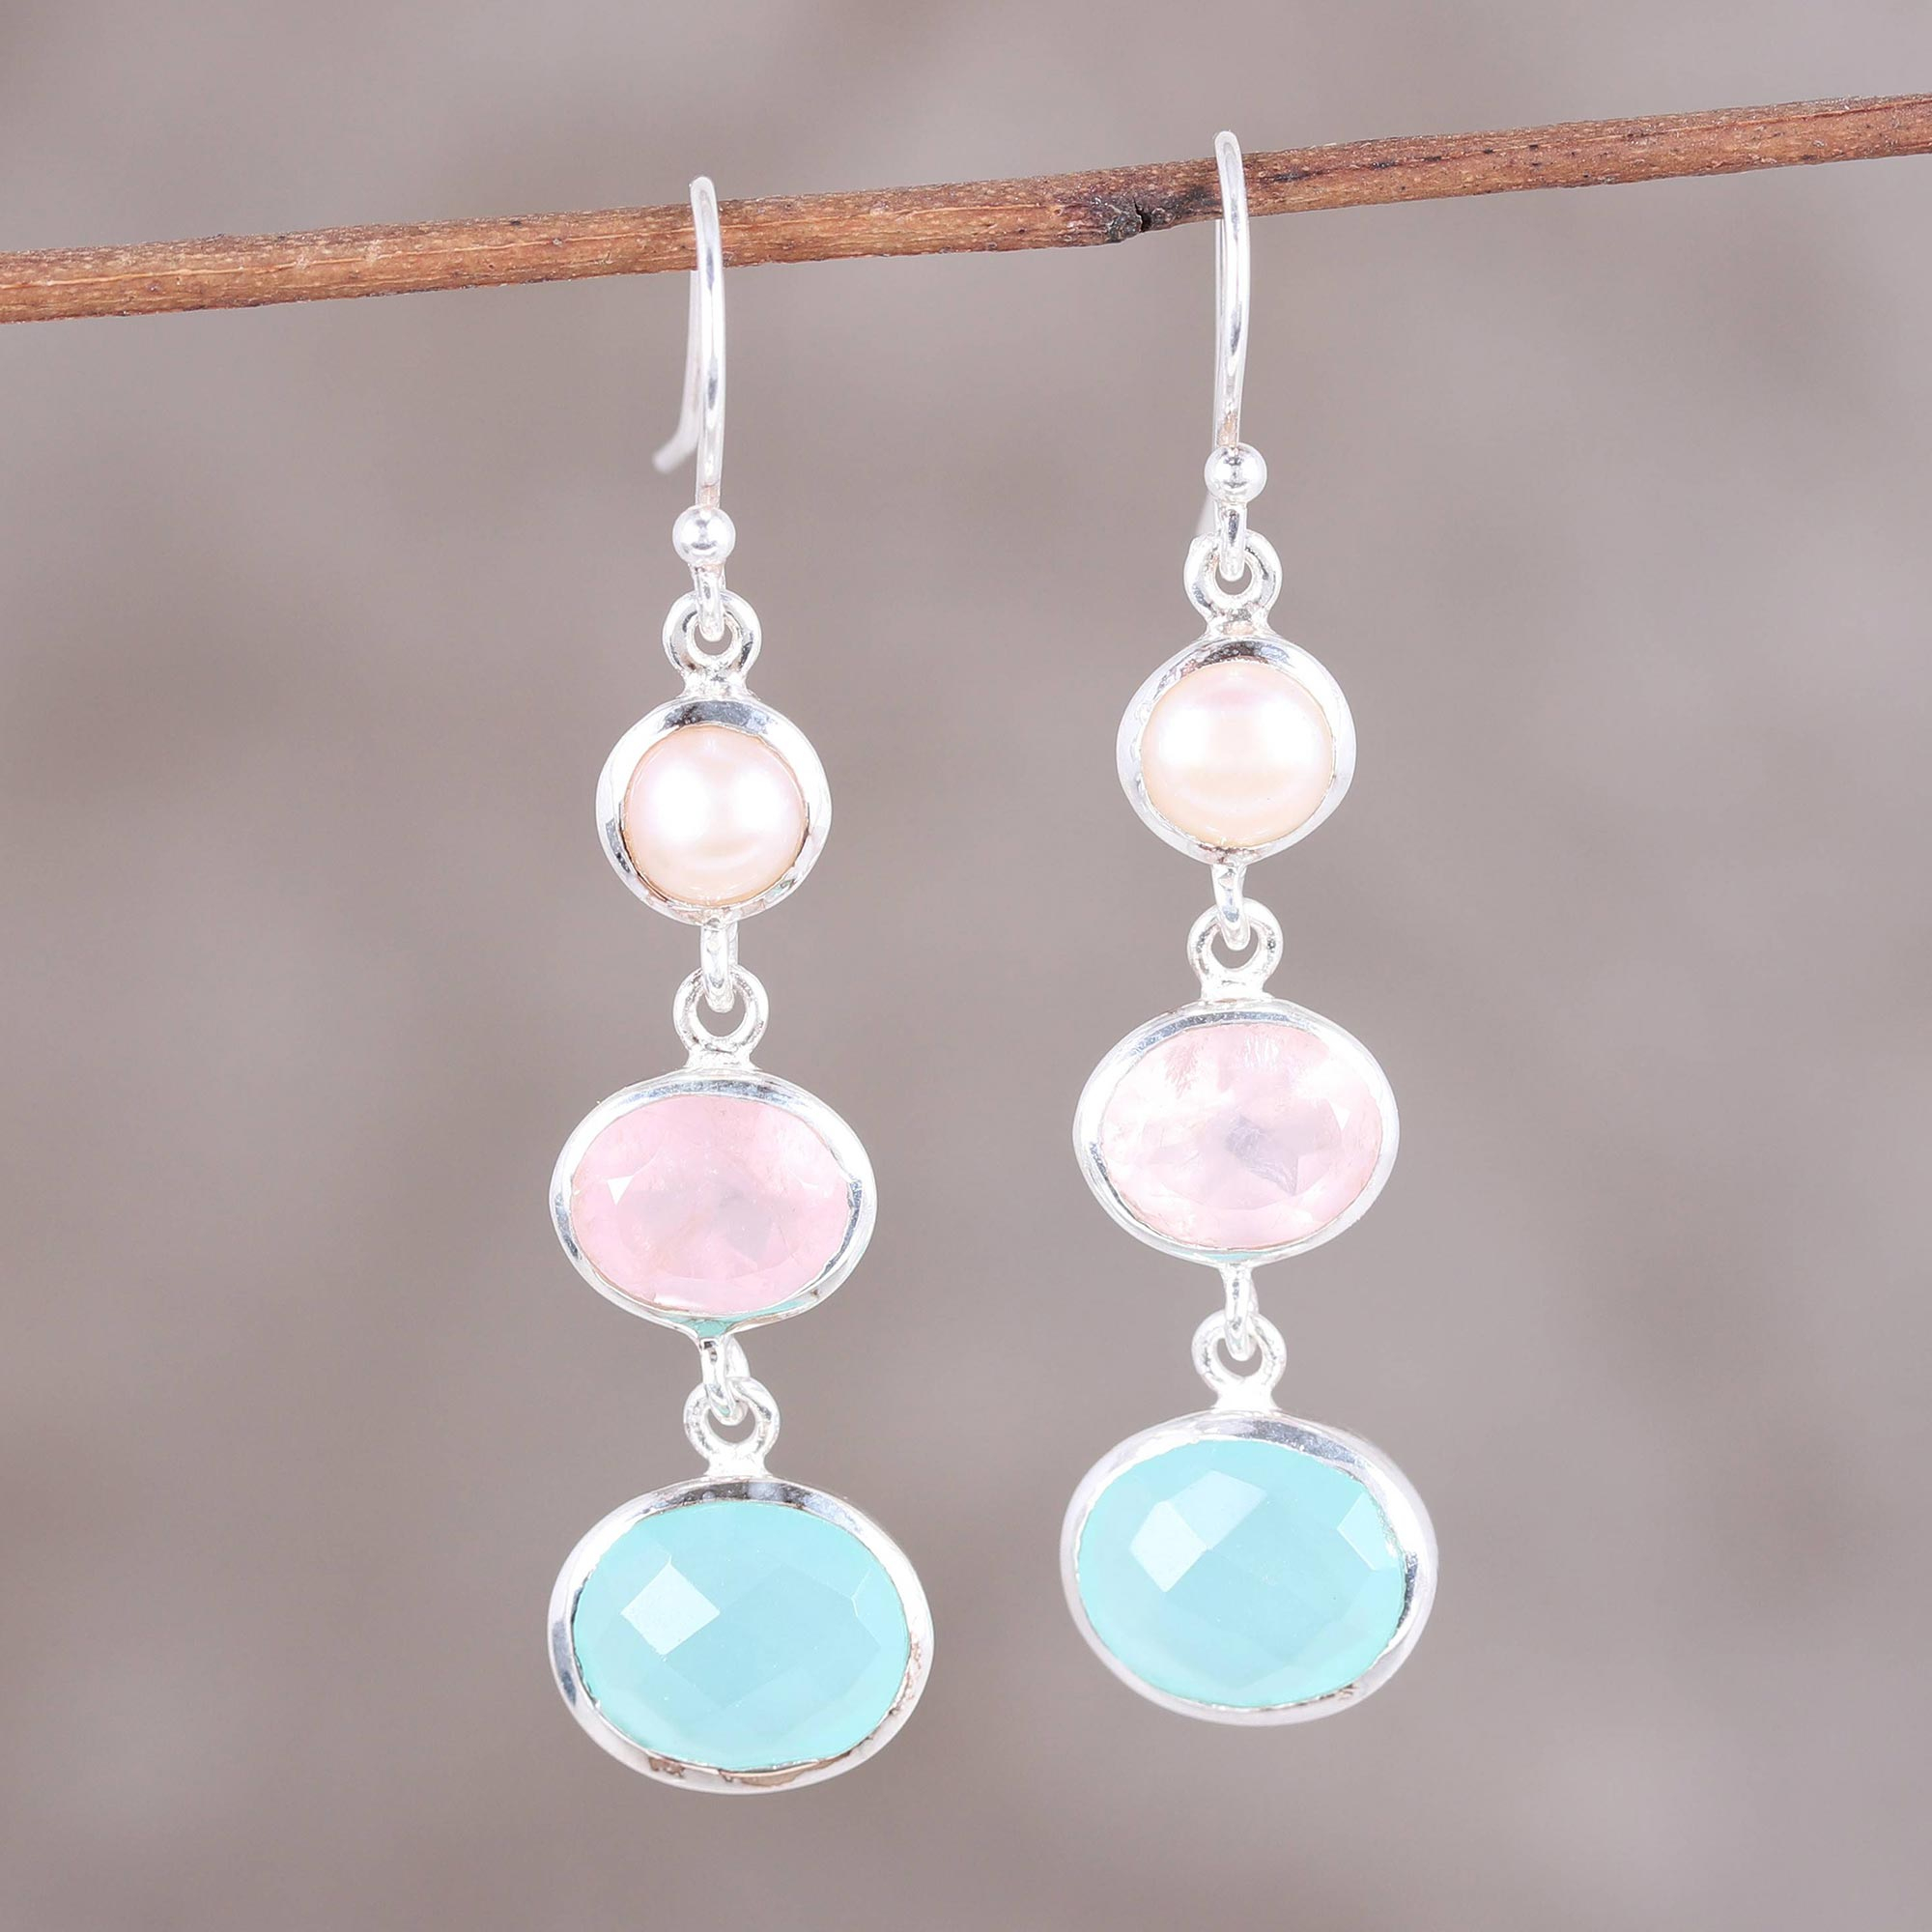 Delicate Freshwater Pearl and Soft Blue Chalcedony Earrings